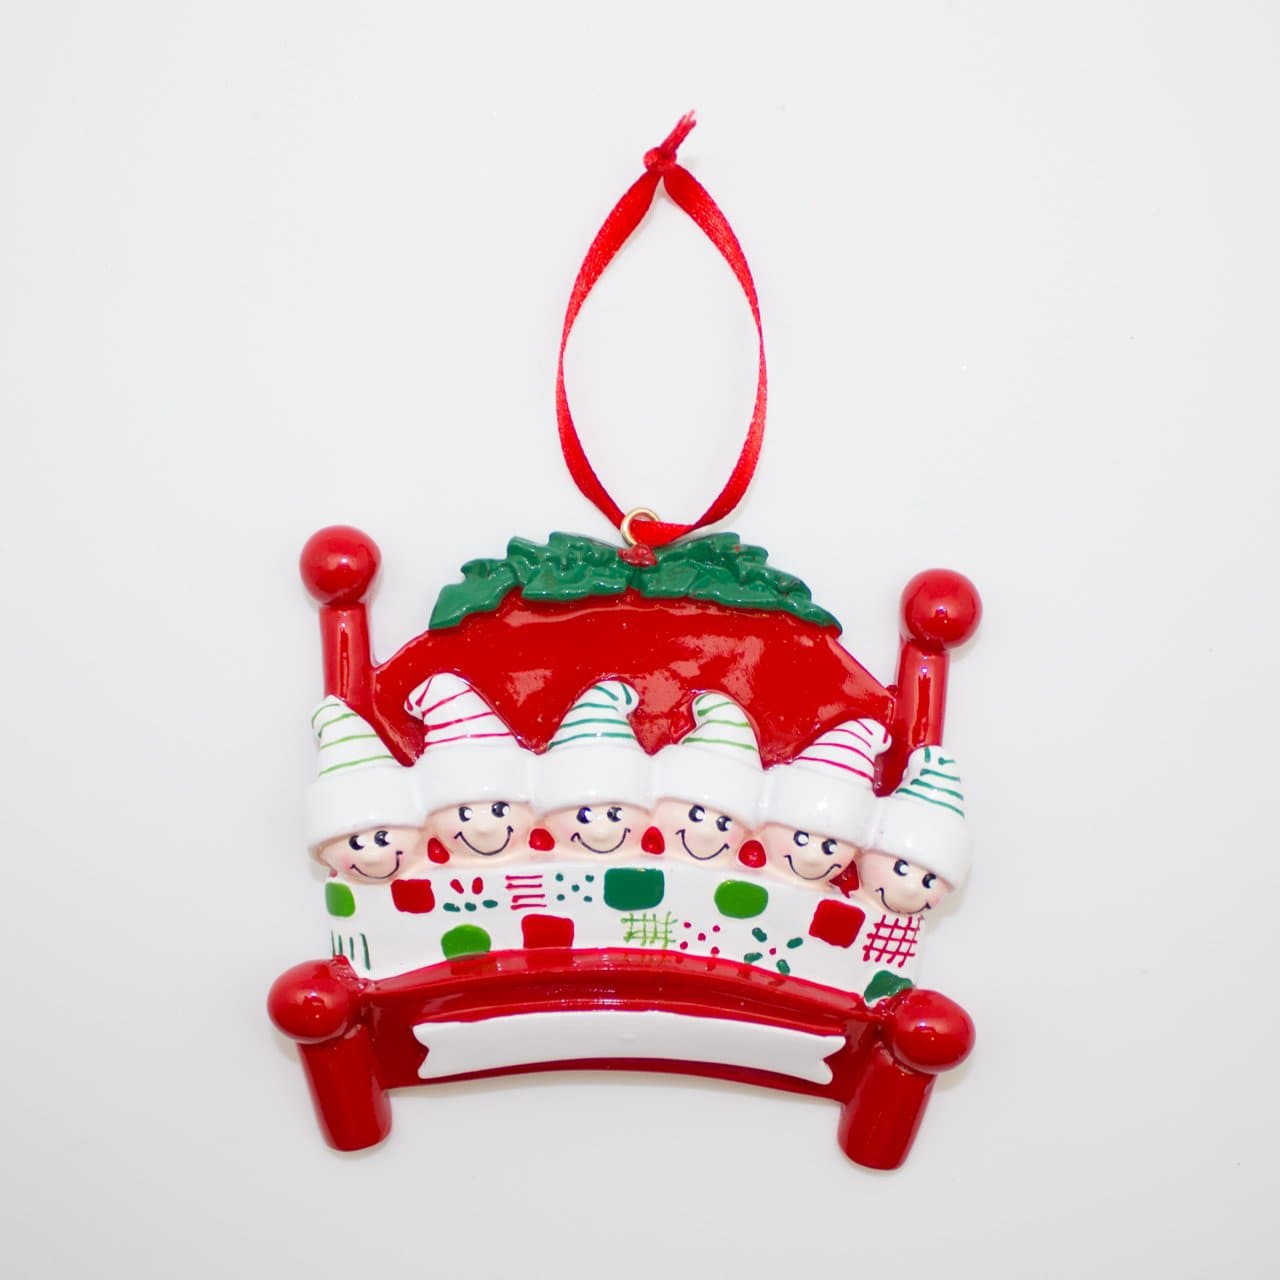 Bed - Christmas Ornament (Suitable for Personalization)